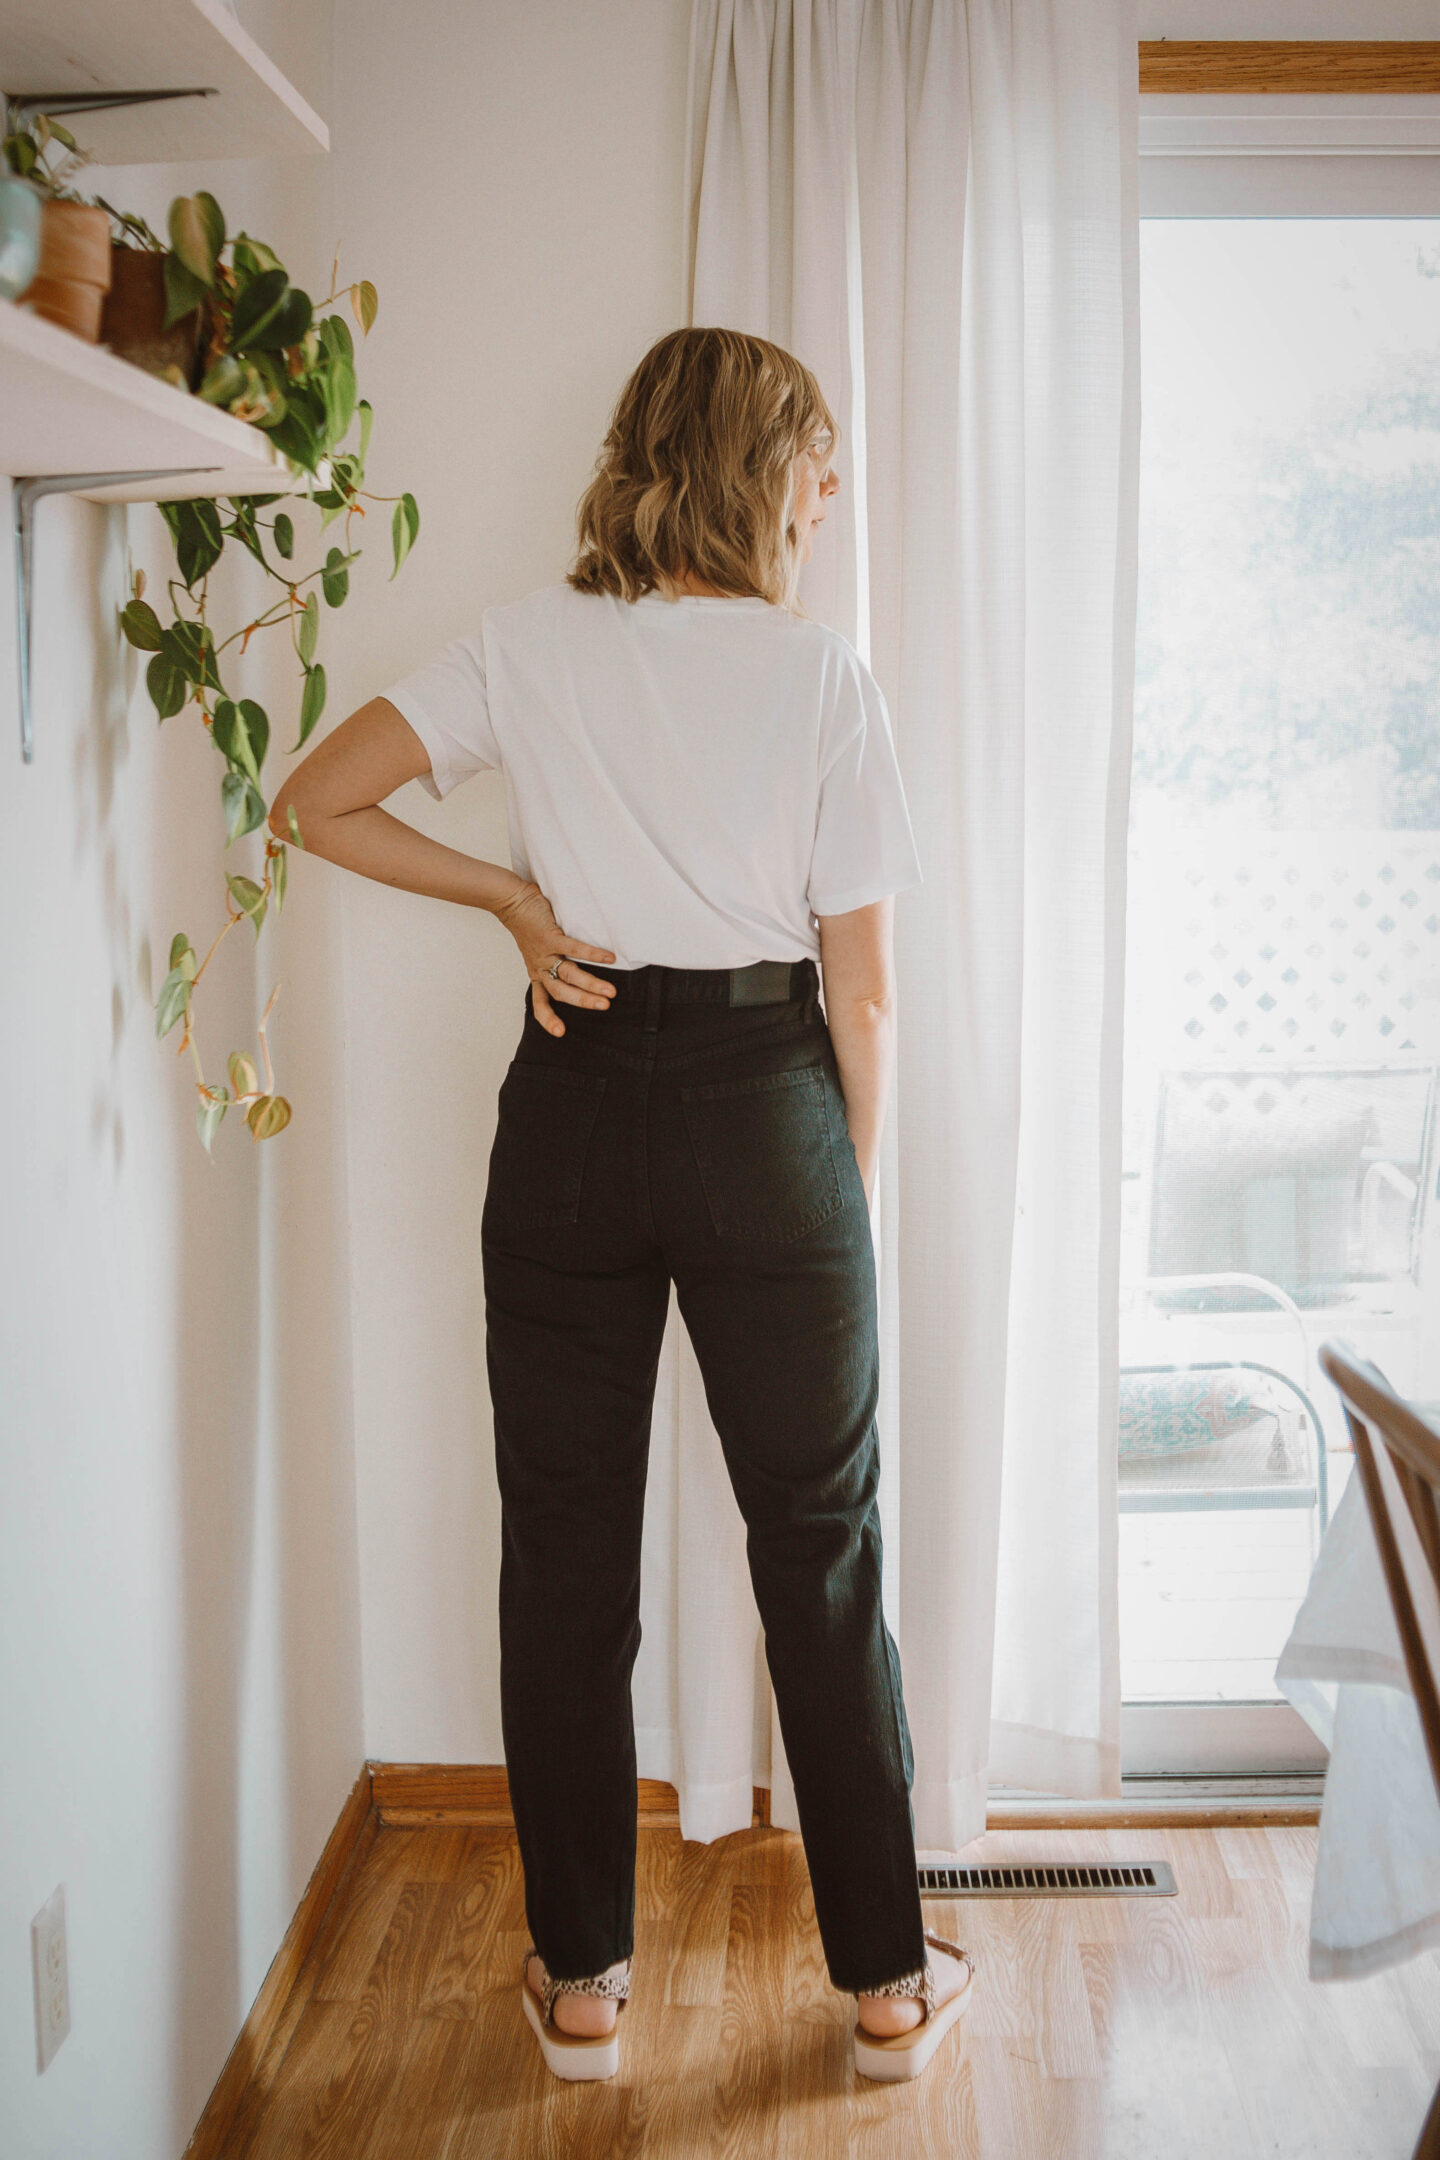 Madewell Denim Guide: The Dad Jean Review